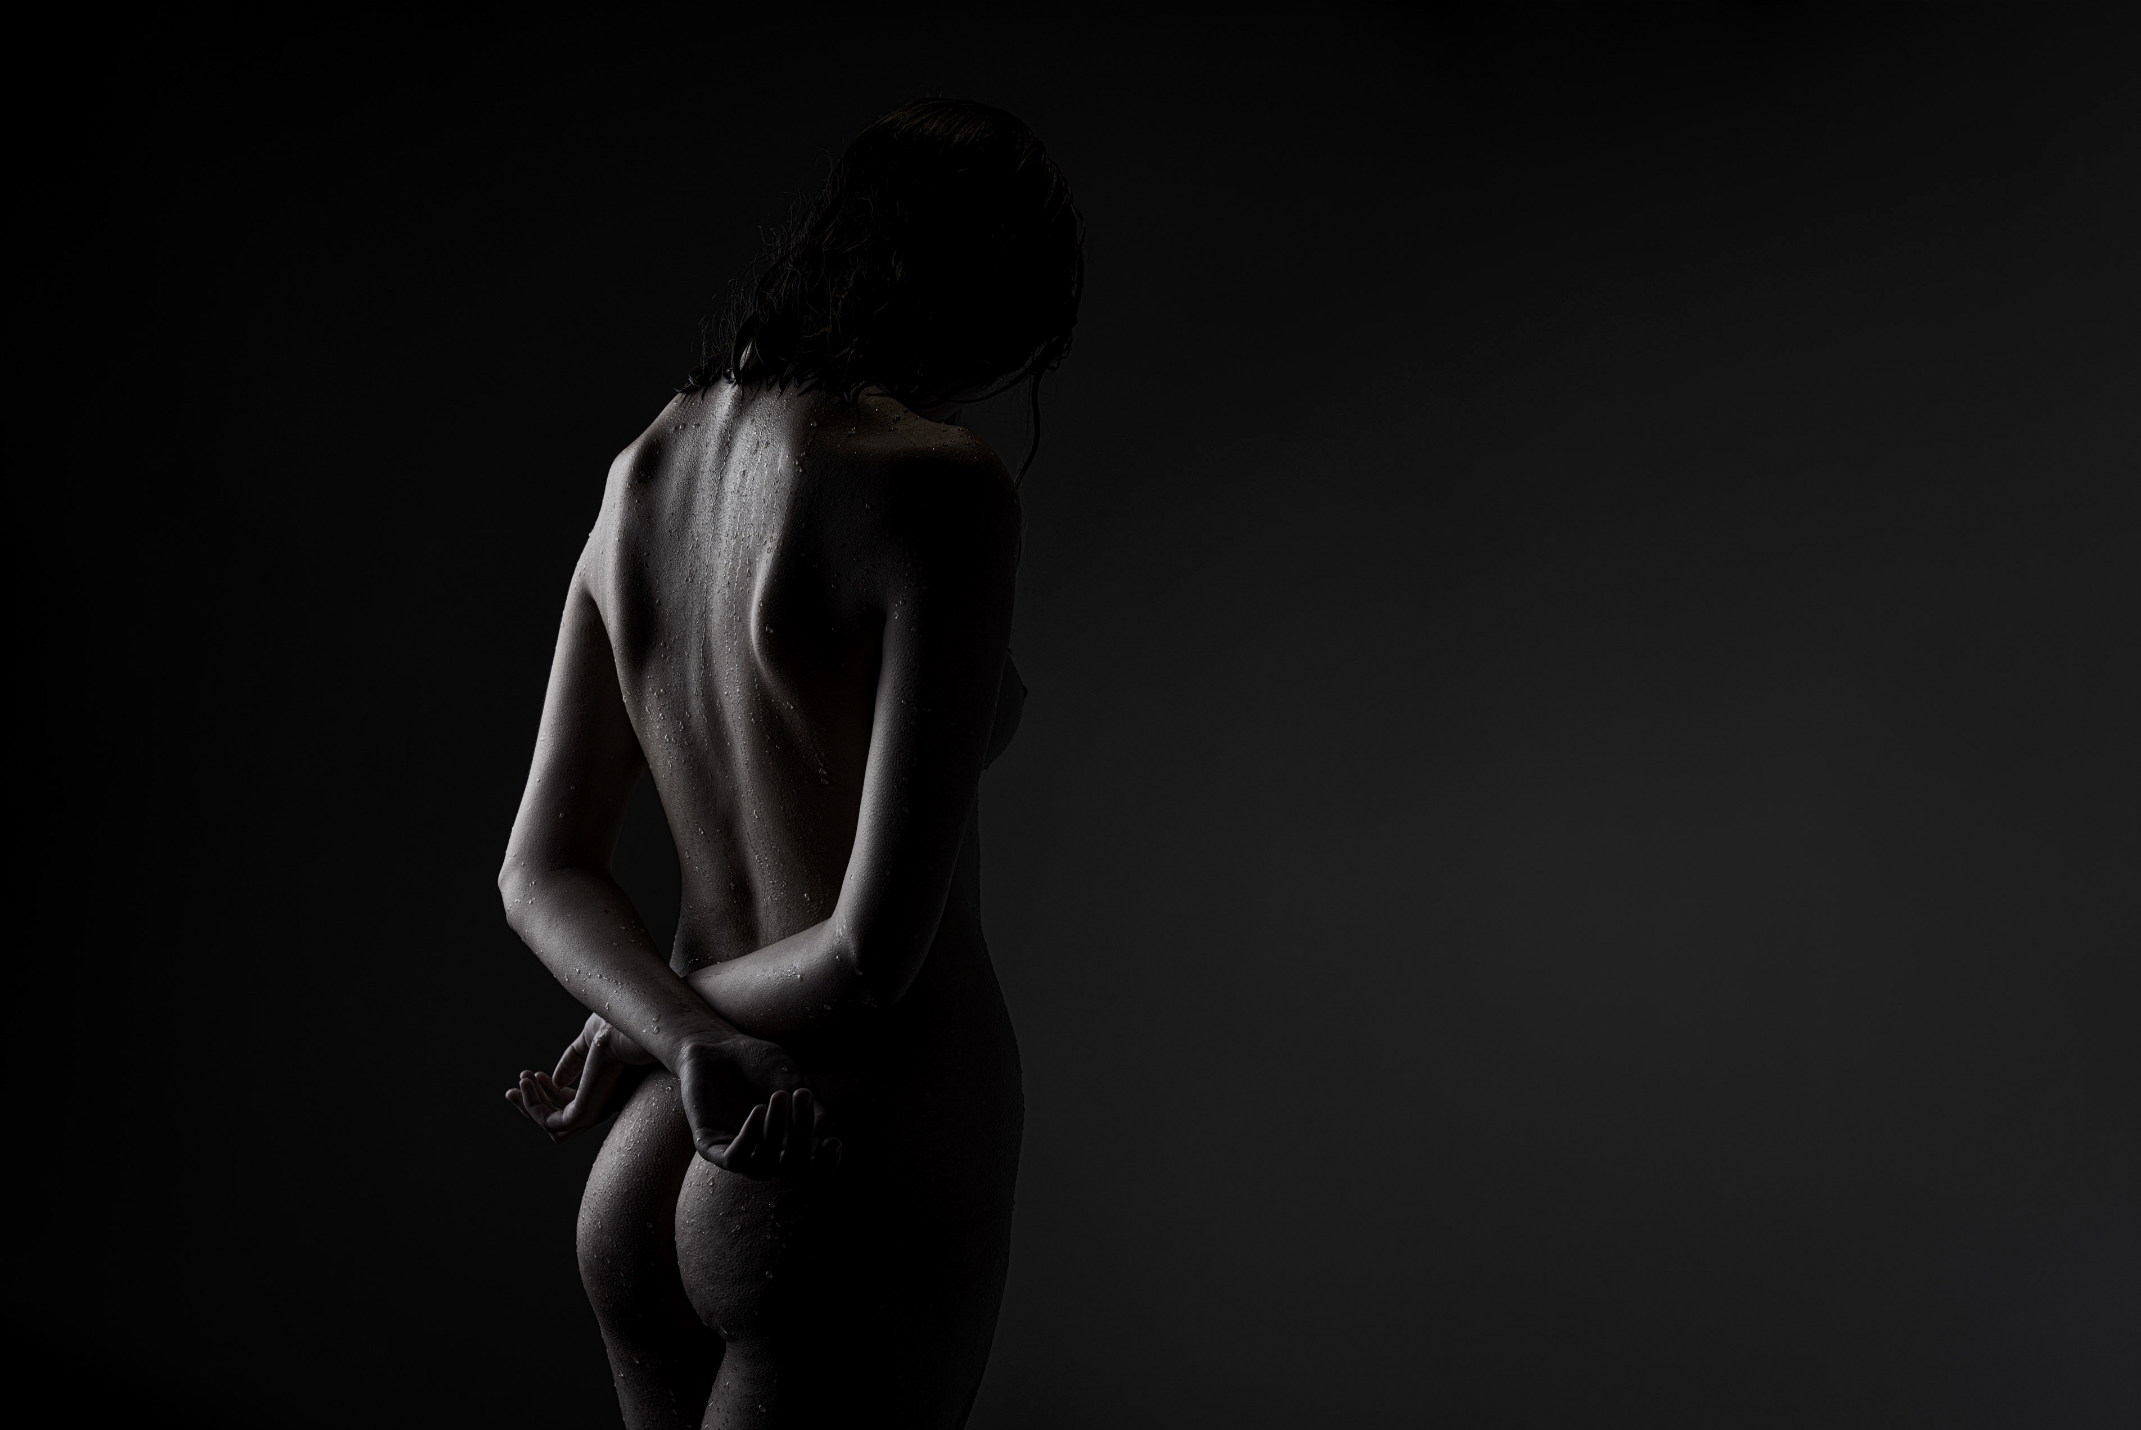 This is a fine art nude photo taken by Melbourne based photographer Tyler Grace